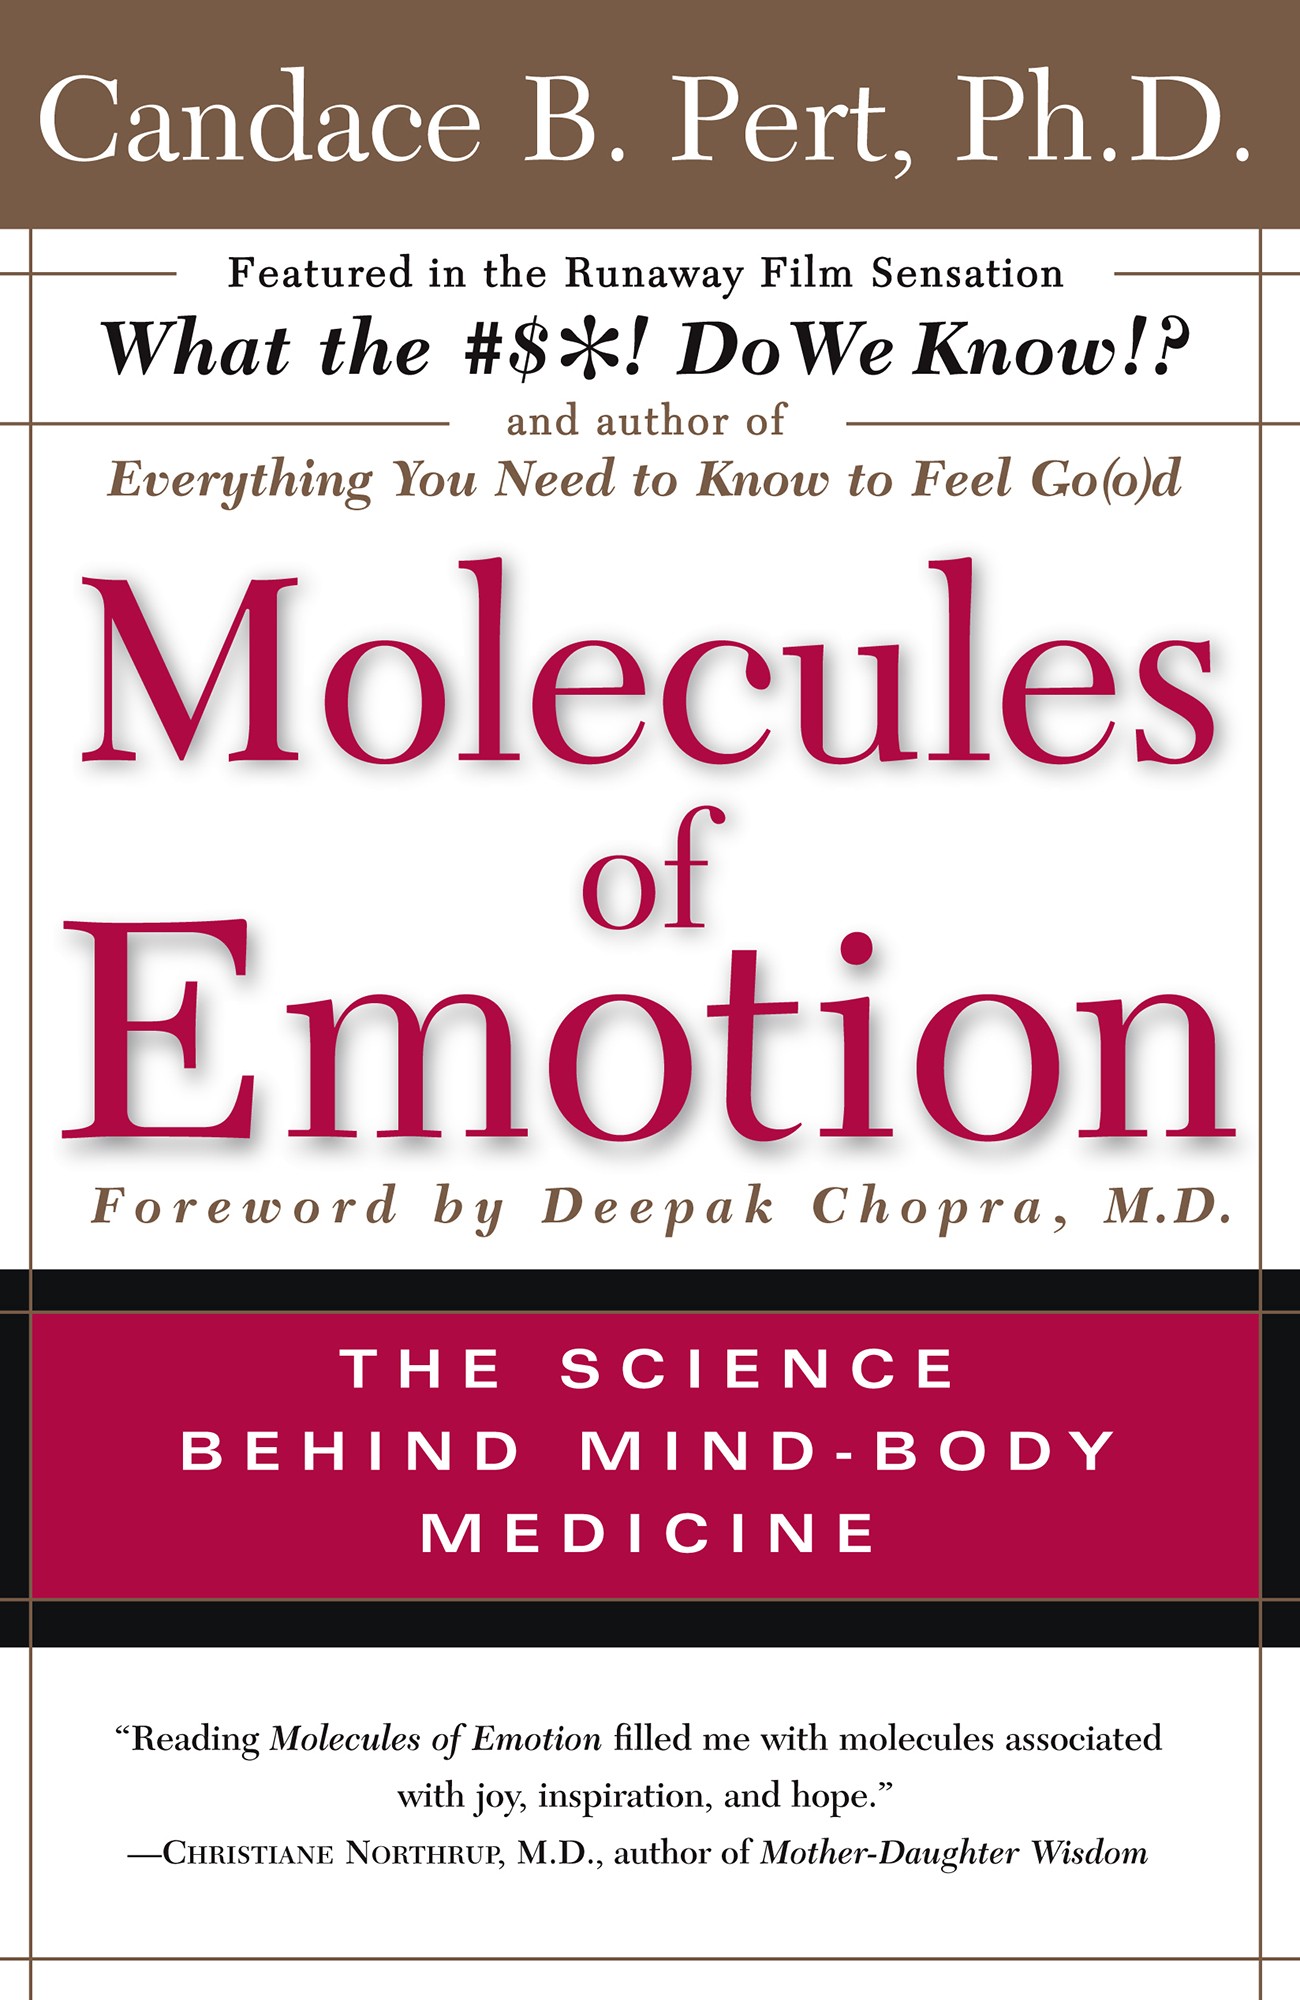 Molecules of Emotion: The Science Behind Mind-Body Medicine